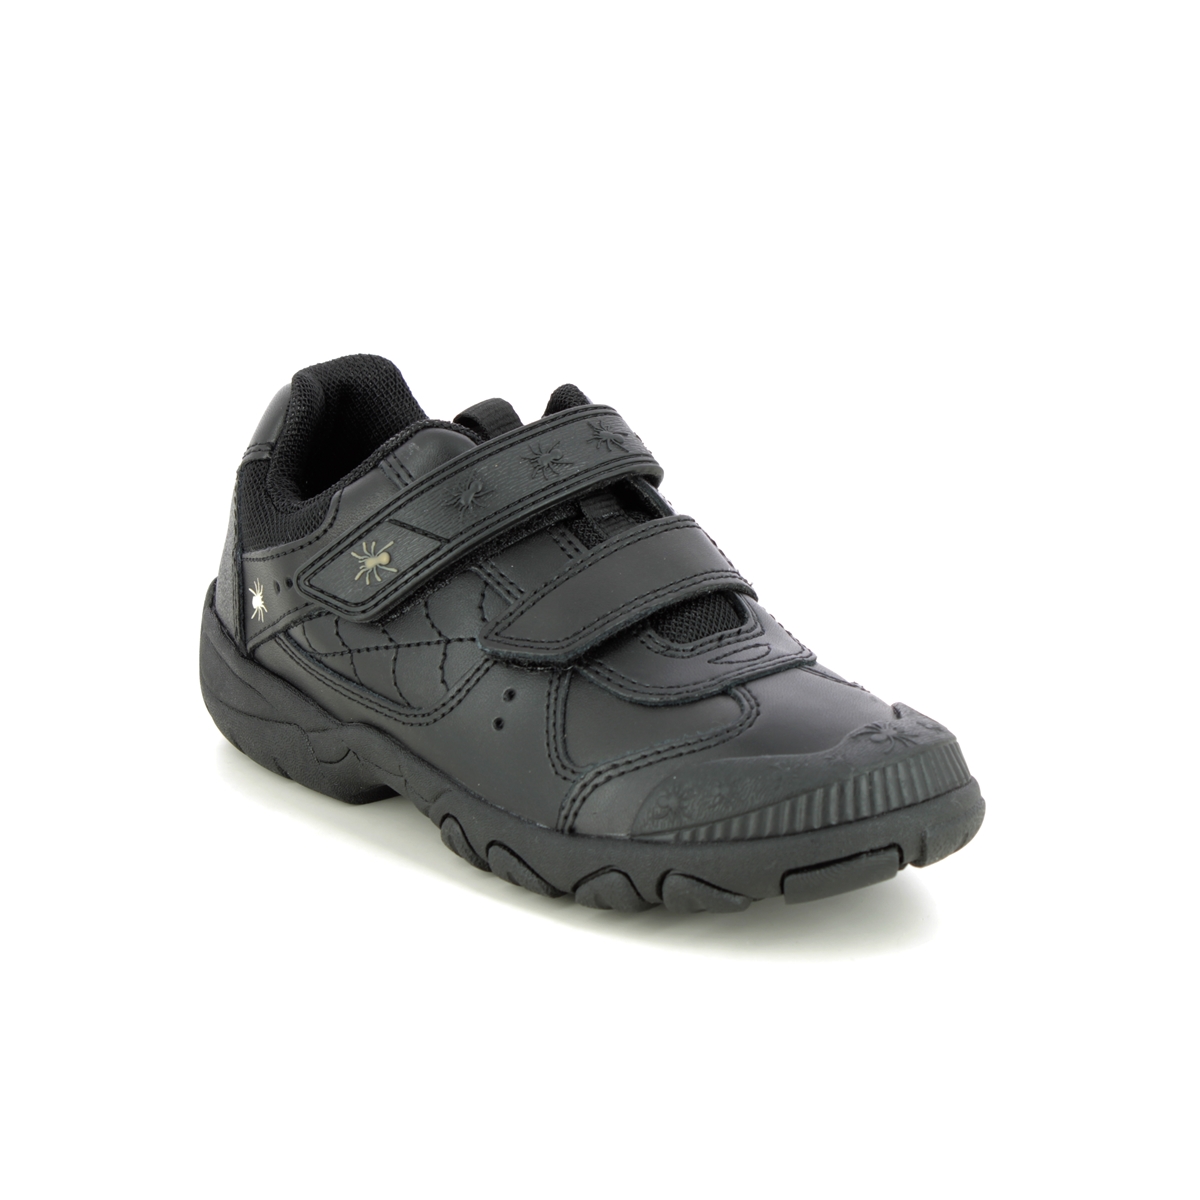 Start Rite - Tarantula In Black Leather 2272-76F In Size 11 In Plain Black Leather For School Boys Shoes  In Black Leather For kids